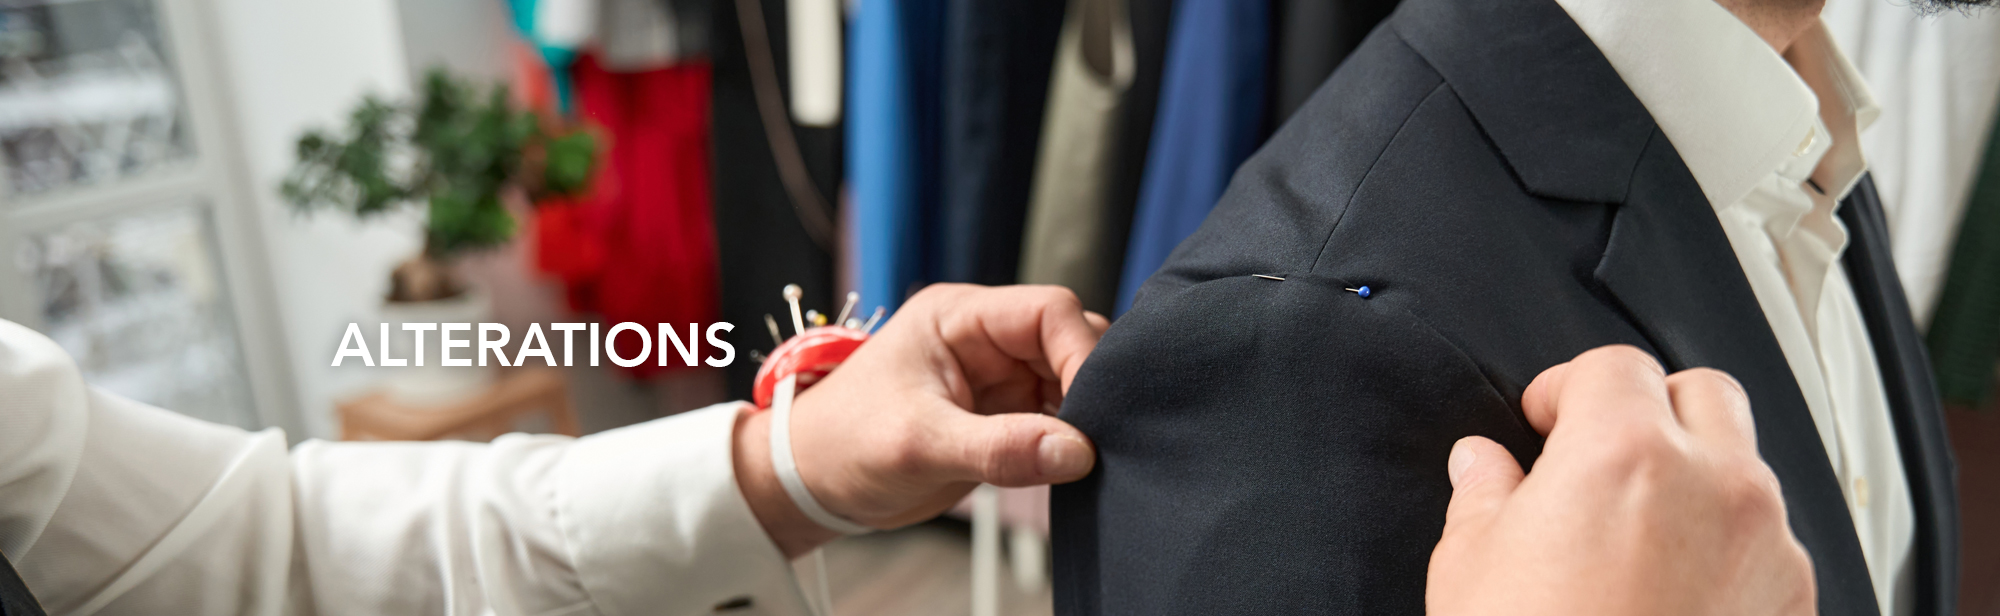 How to Find a Good Tailor | The Art of Manliness